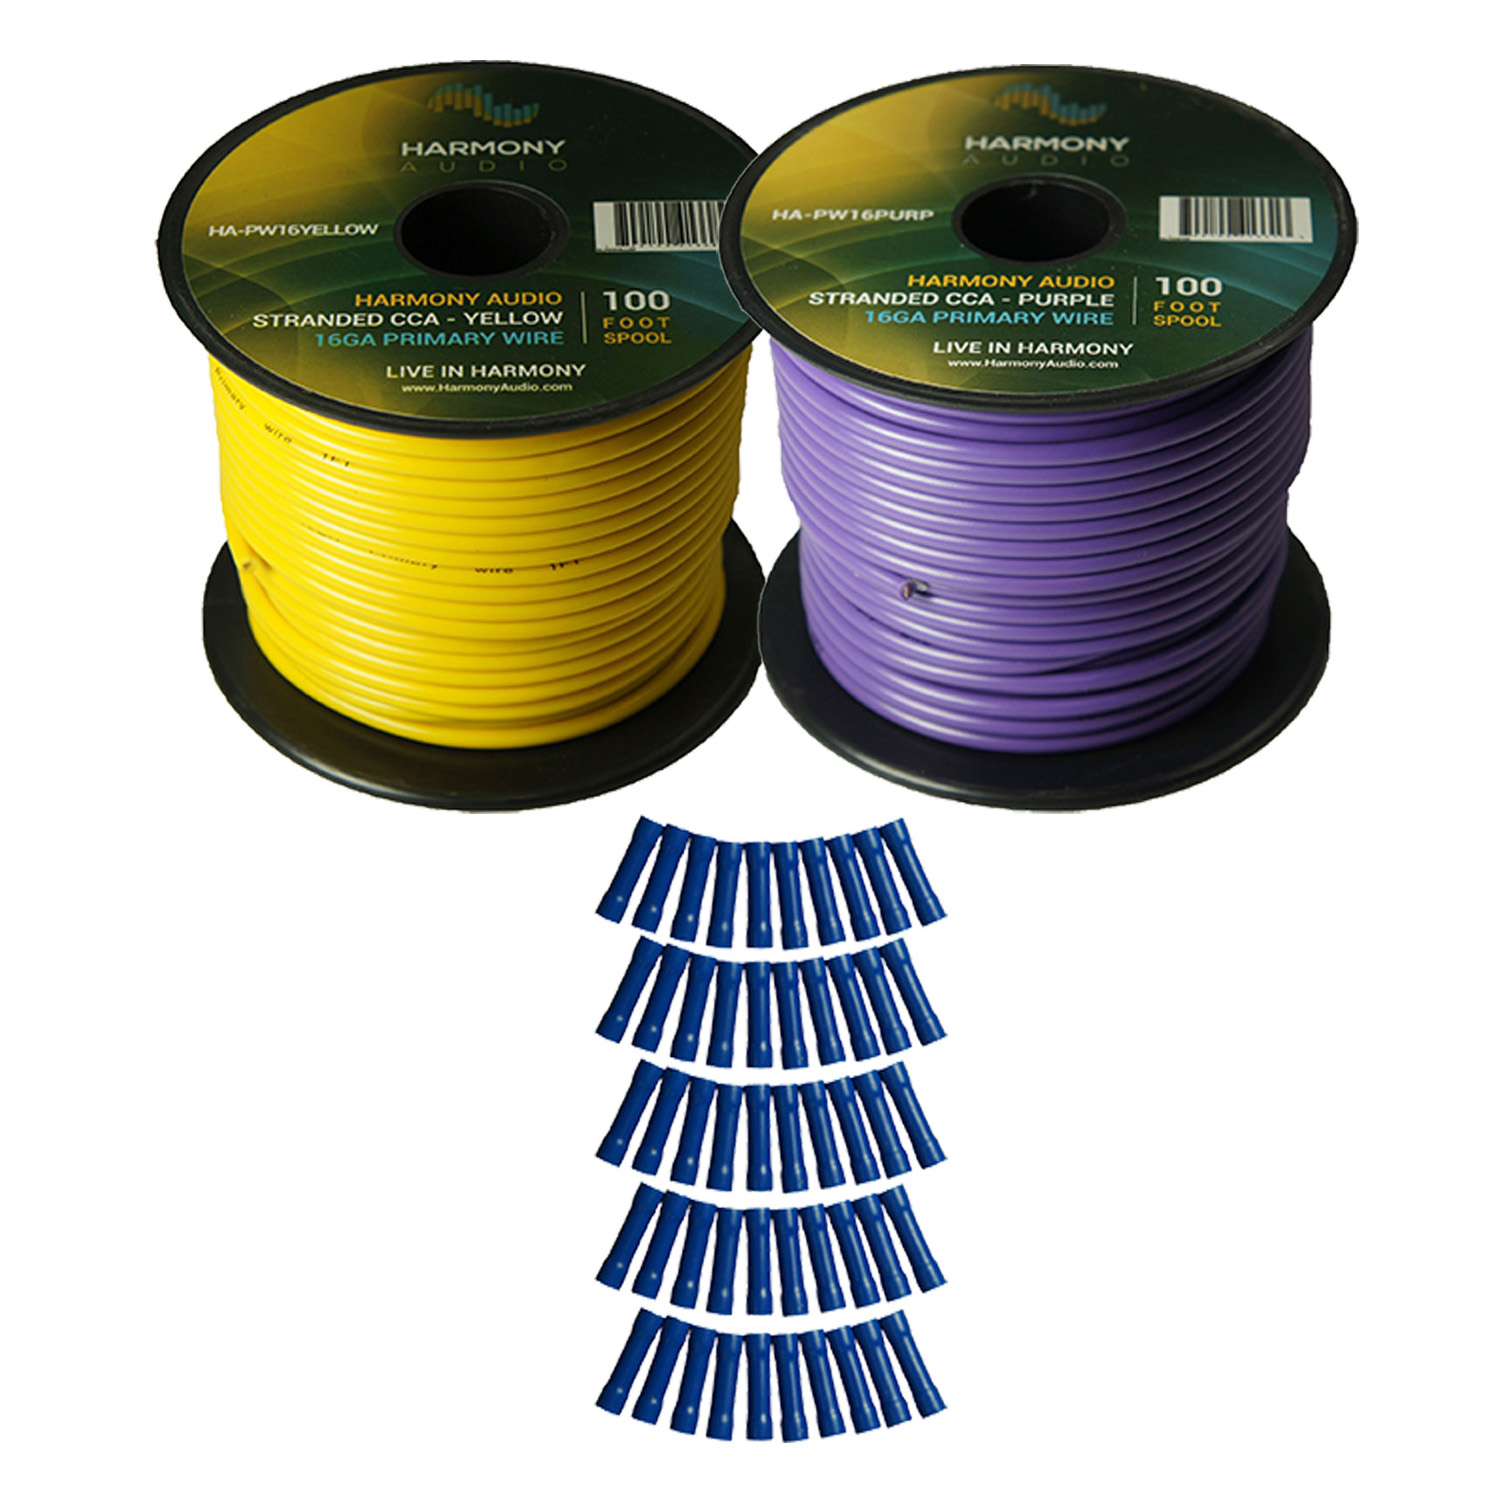 Harmony Audio Primary Single Conductor 16 Gauge Power or Ground Wire - 2 Rolls - 200 Feet - Yellow & Purple for Car Audio / Trailer / Model Train / Remote